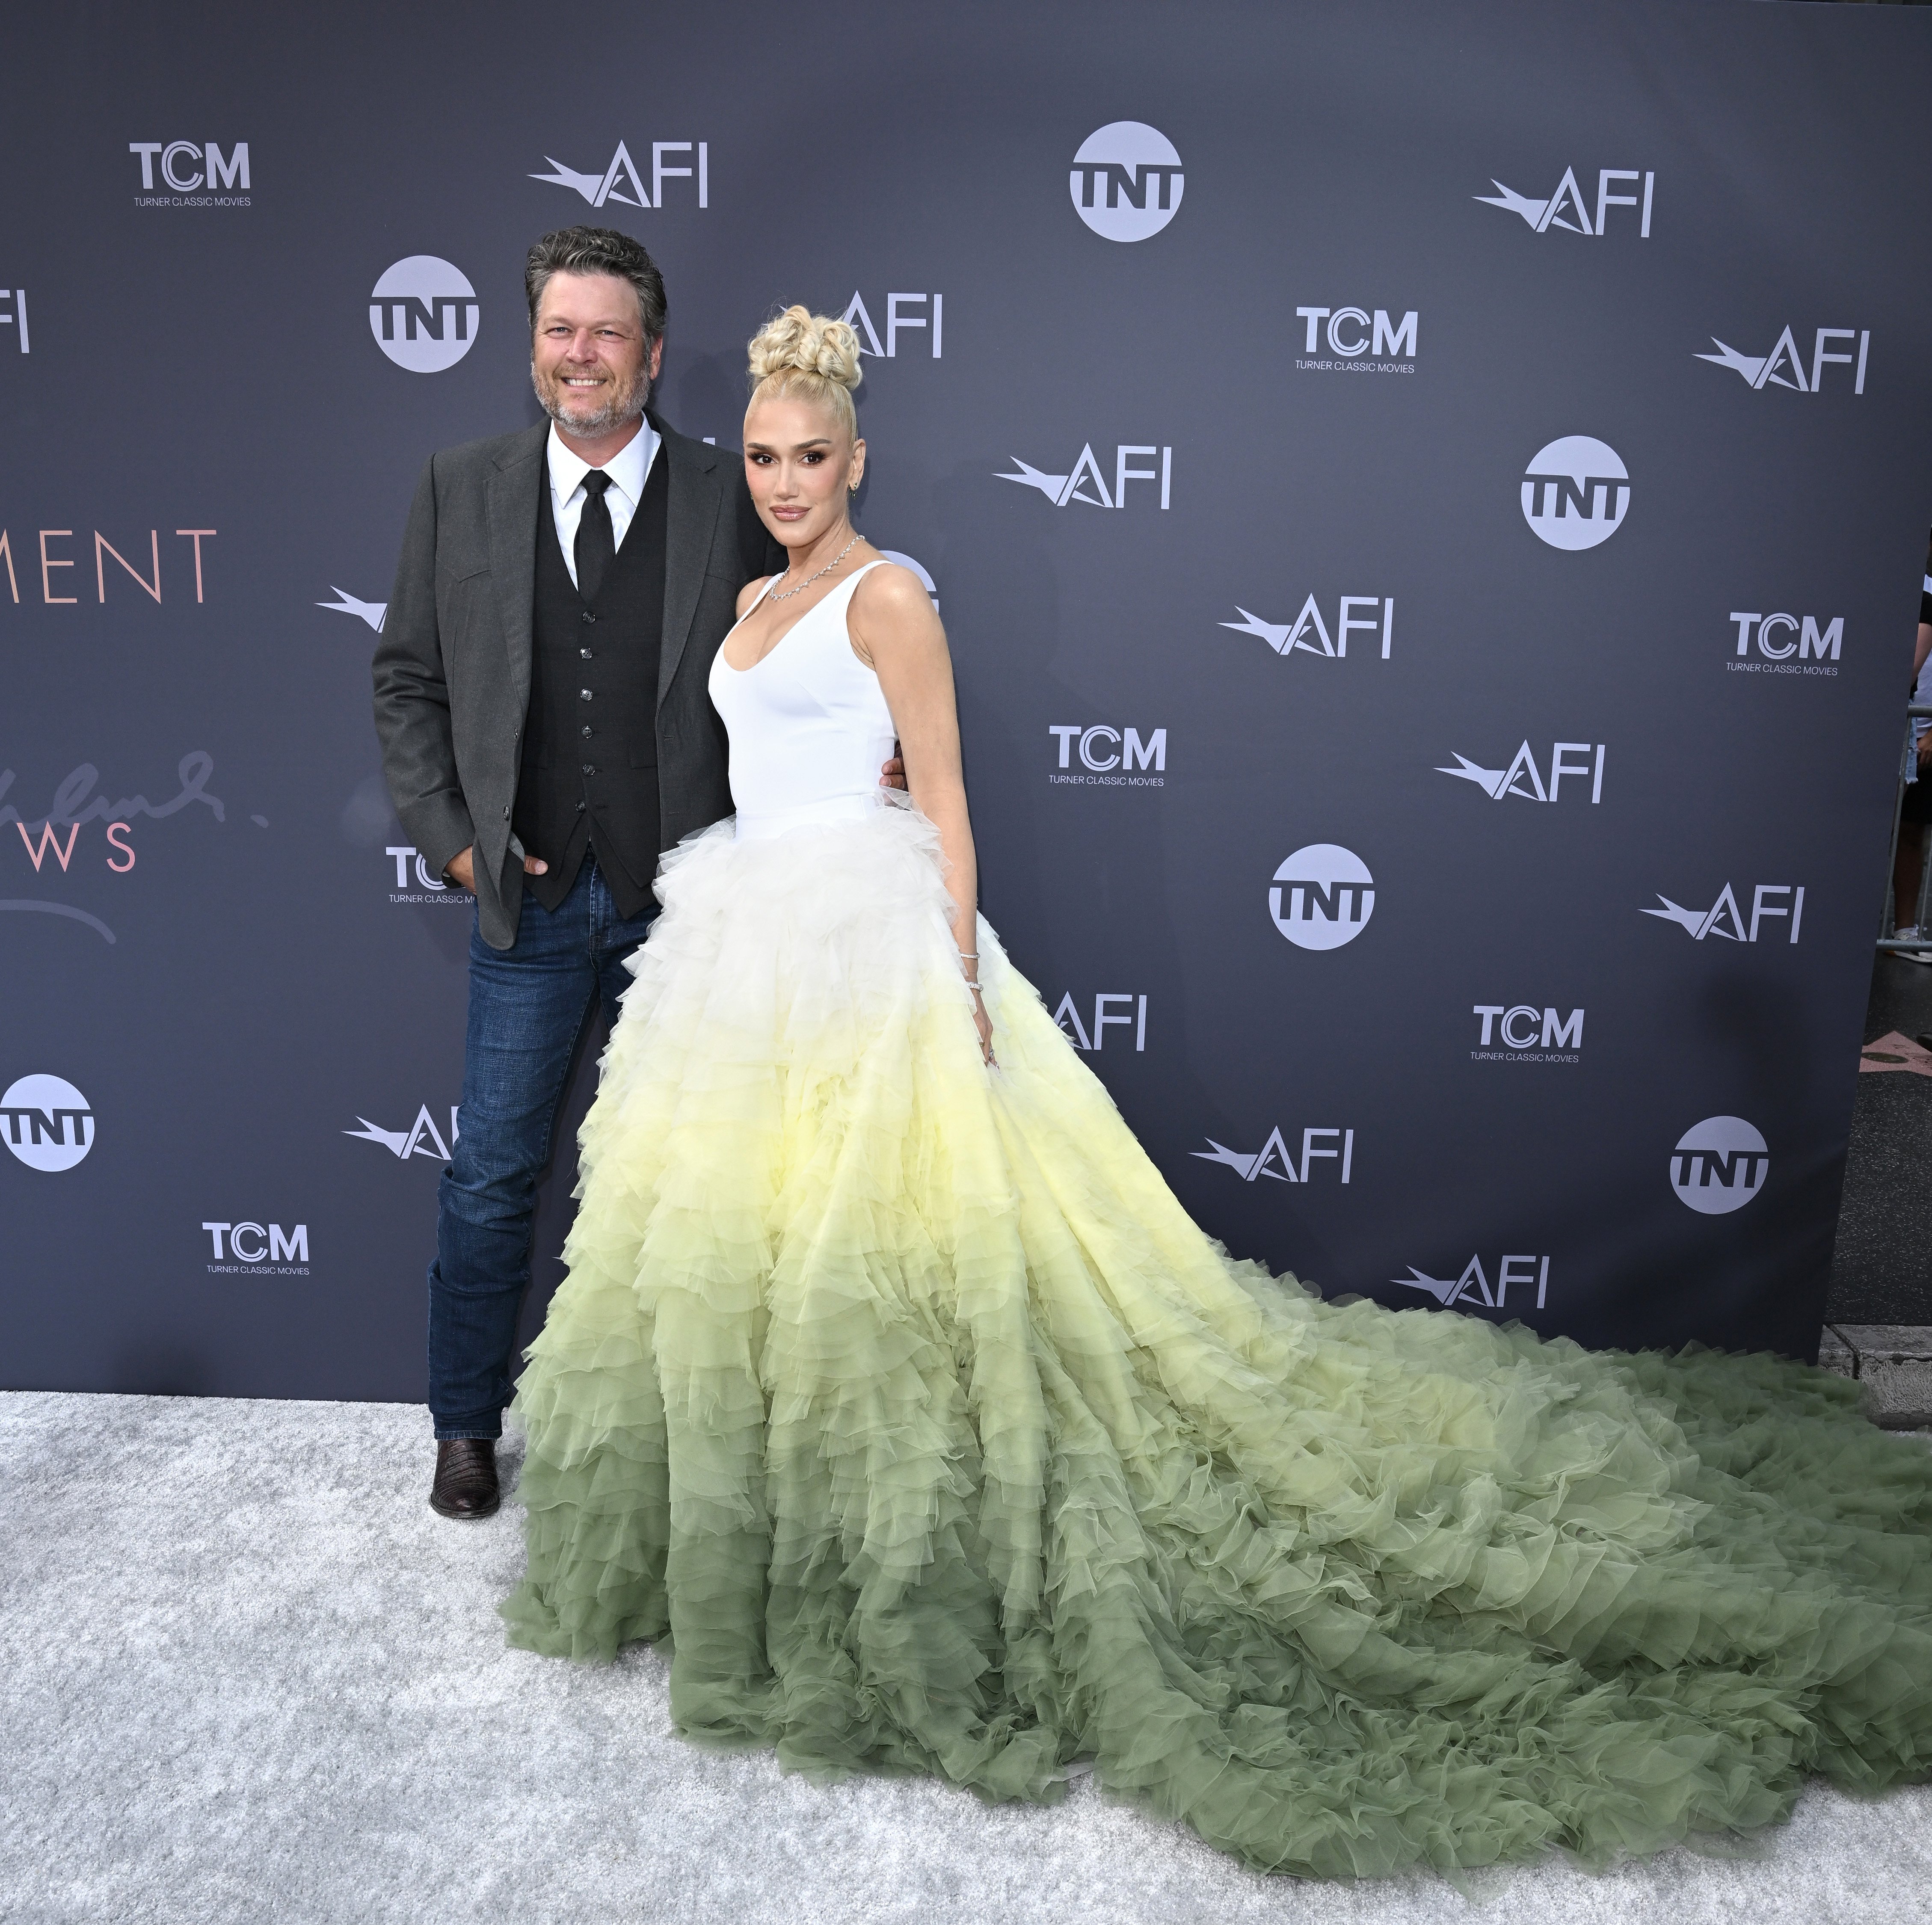 Blake Shelton and Gwen Stefani attend the 48th AFI Life Achievement Award Gala Tribute celebrating Julie Andrews at Dolby Theatre on June 09, 2022 in Hollywood, California. | Source: Getty Images